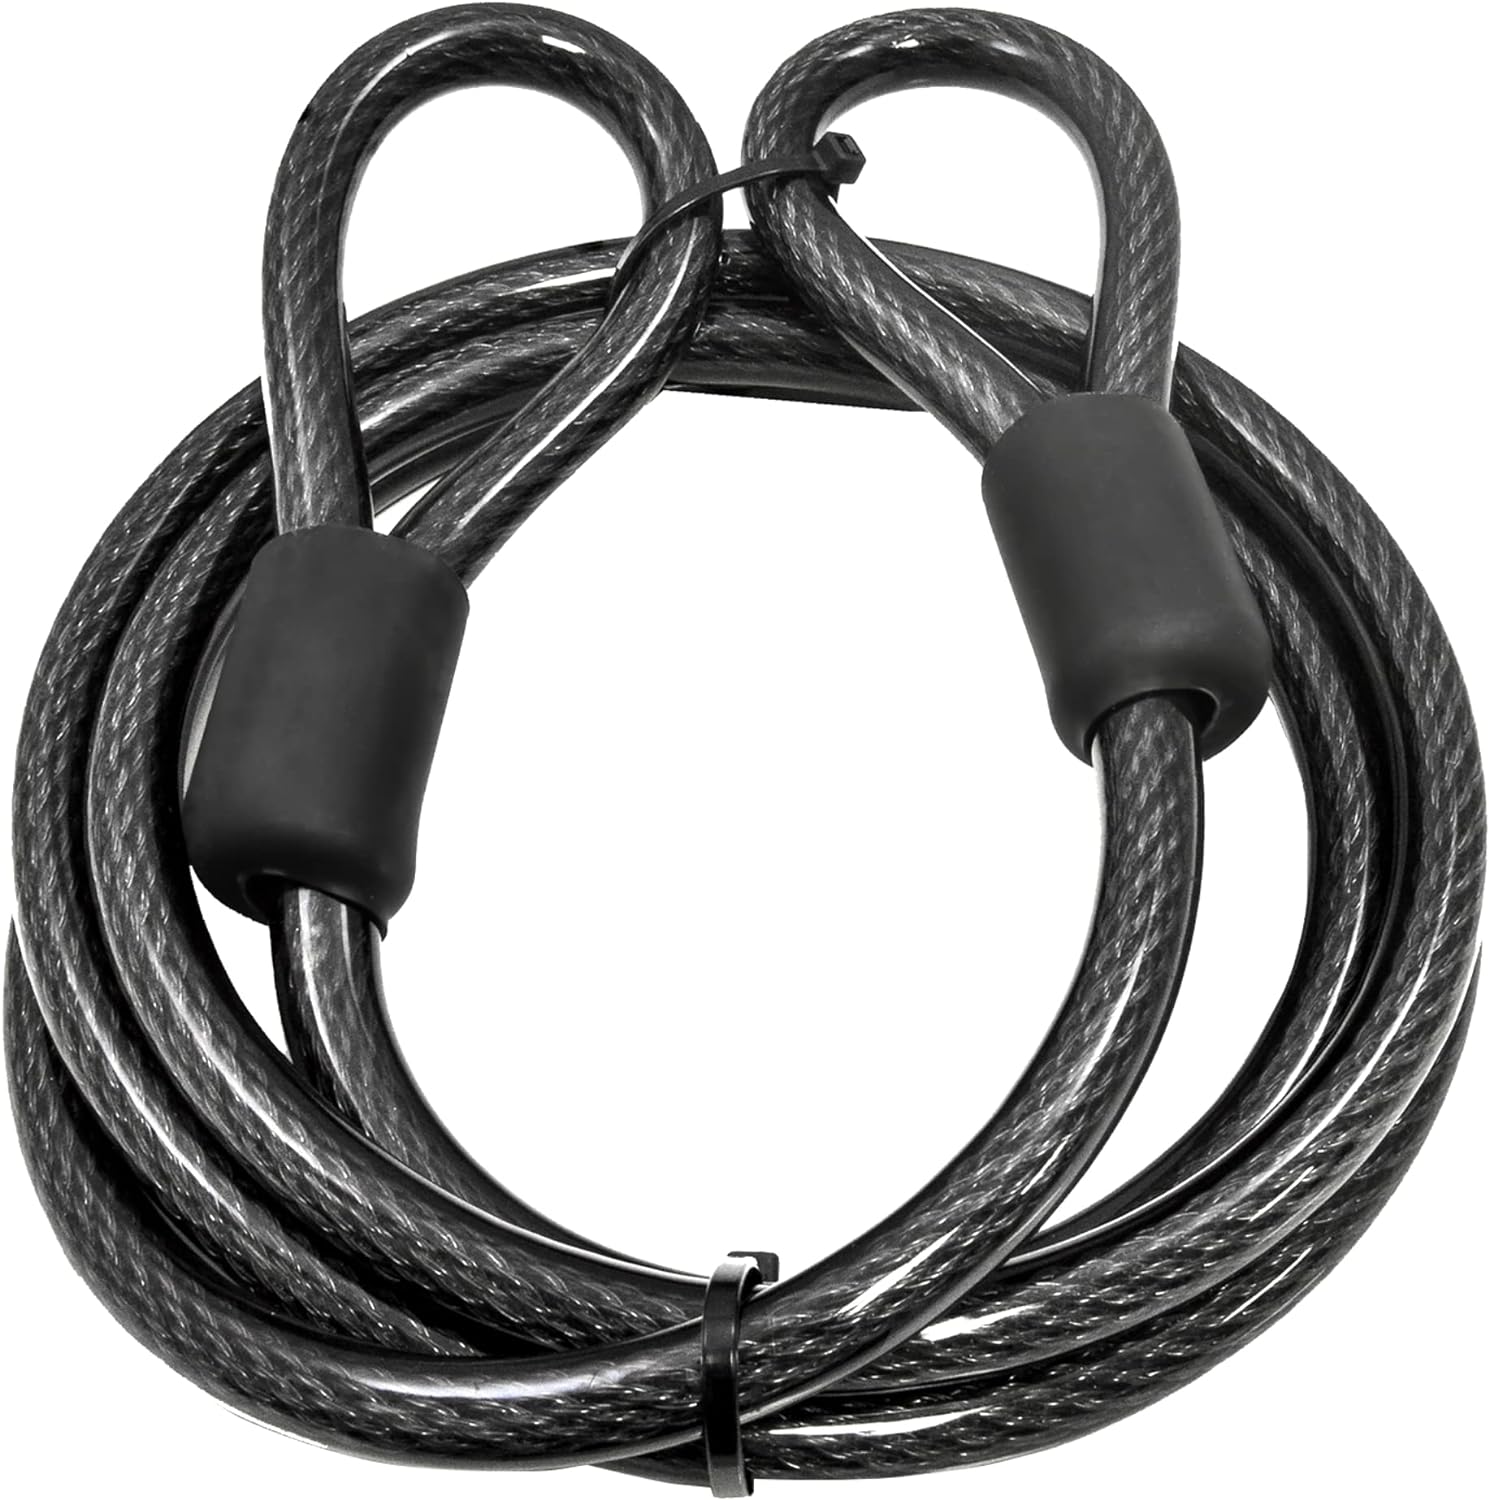 Lumintrail 12mm (1/2 inch) Heavy-Duty Security Cable, Vinyl Coated Braided Steel with Sealed Looped Ends (4', 7', 10', 15' or 30') (15-FT)